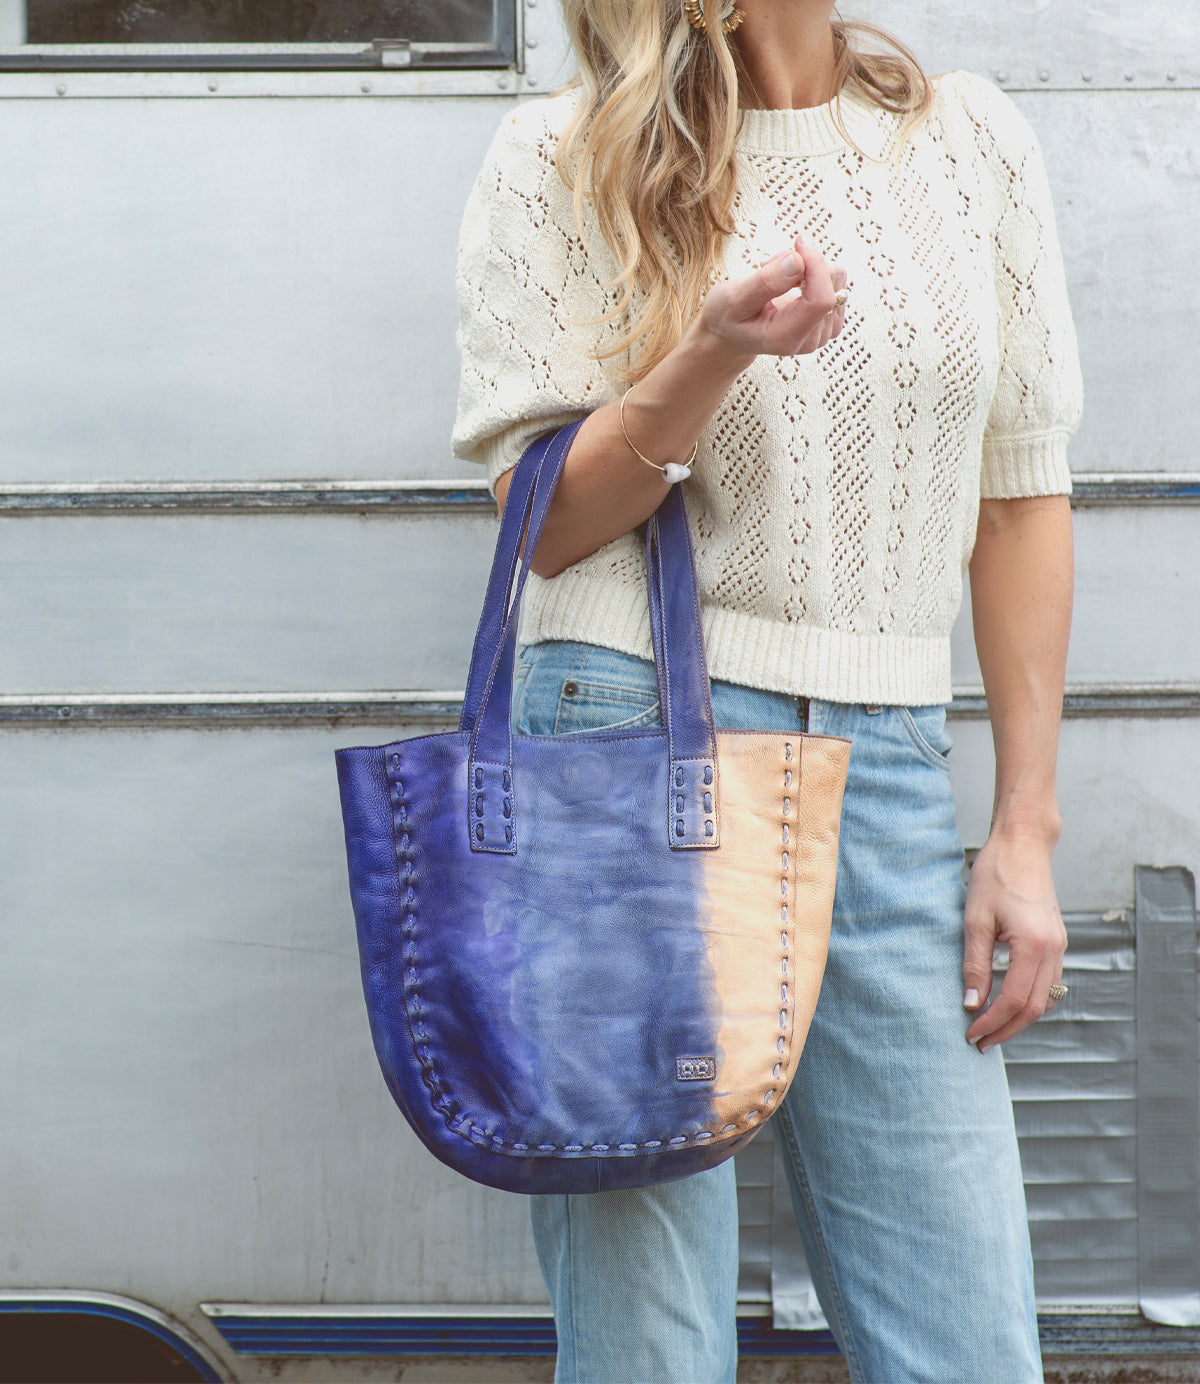 A woman holding a Bed Stu Stevie tote bag in blue and tan.